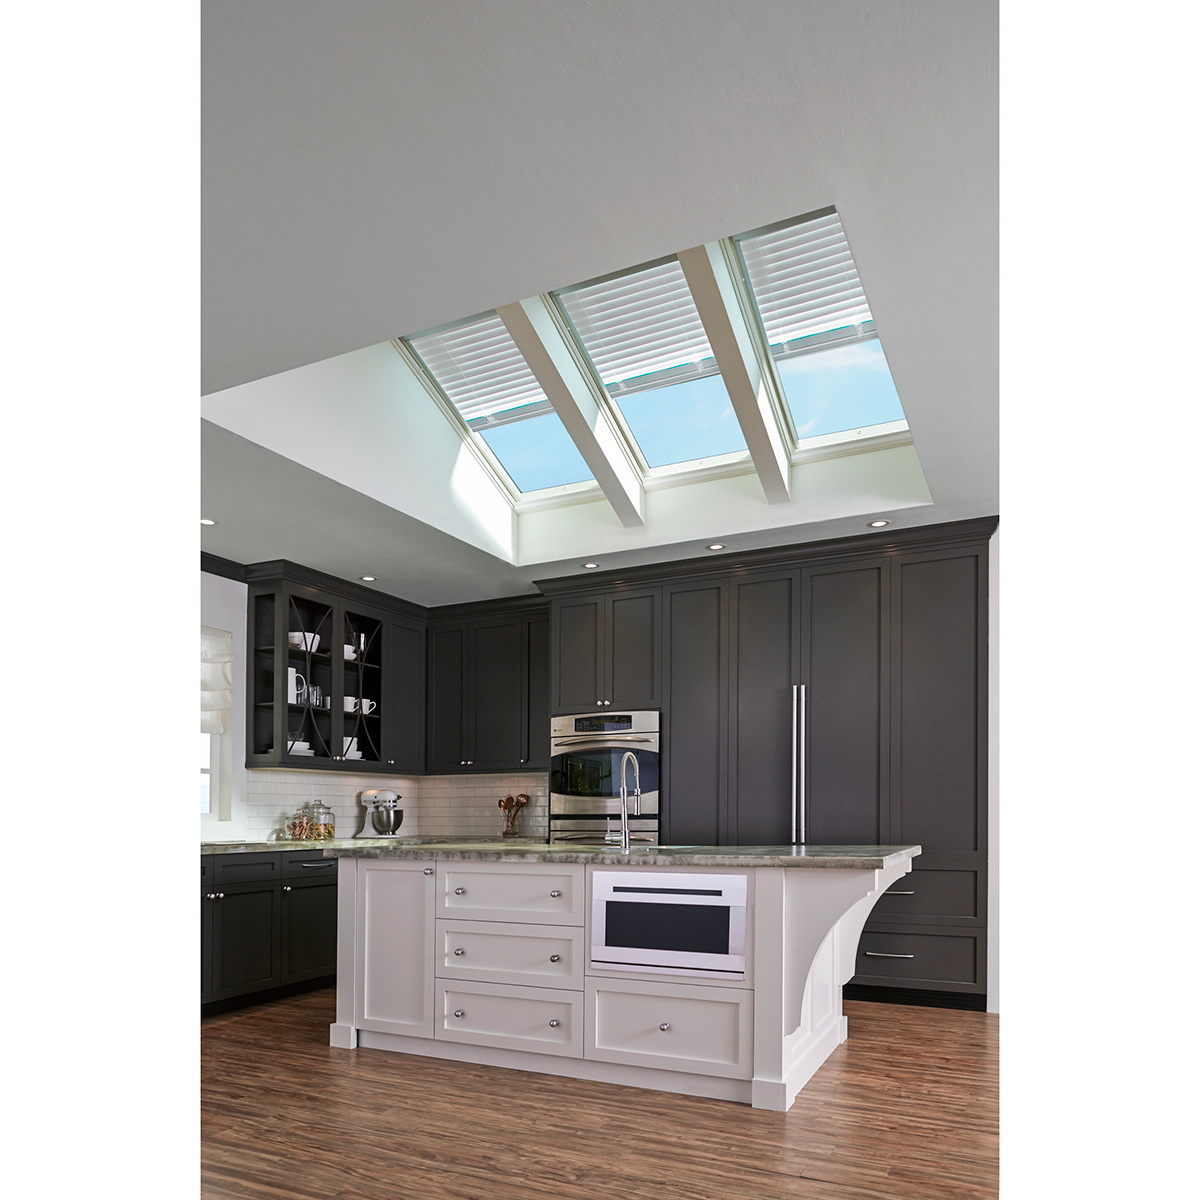 Fixed Curb-Mount Skylight with Laminated Low-E3 Glass - 22-1/2 in. x 22-1/2 in. - FCM 2222